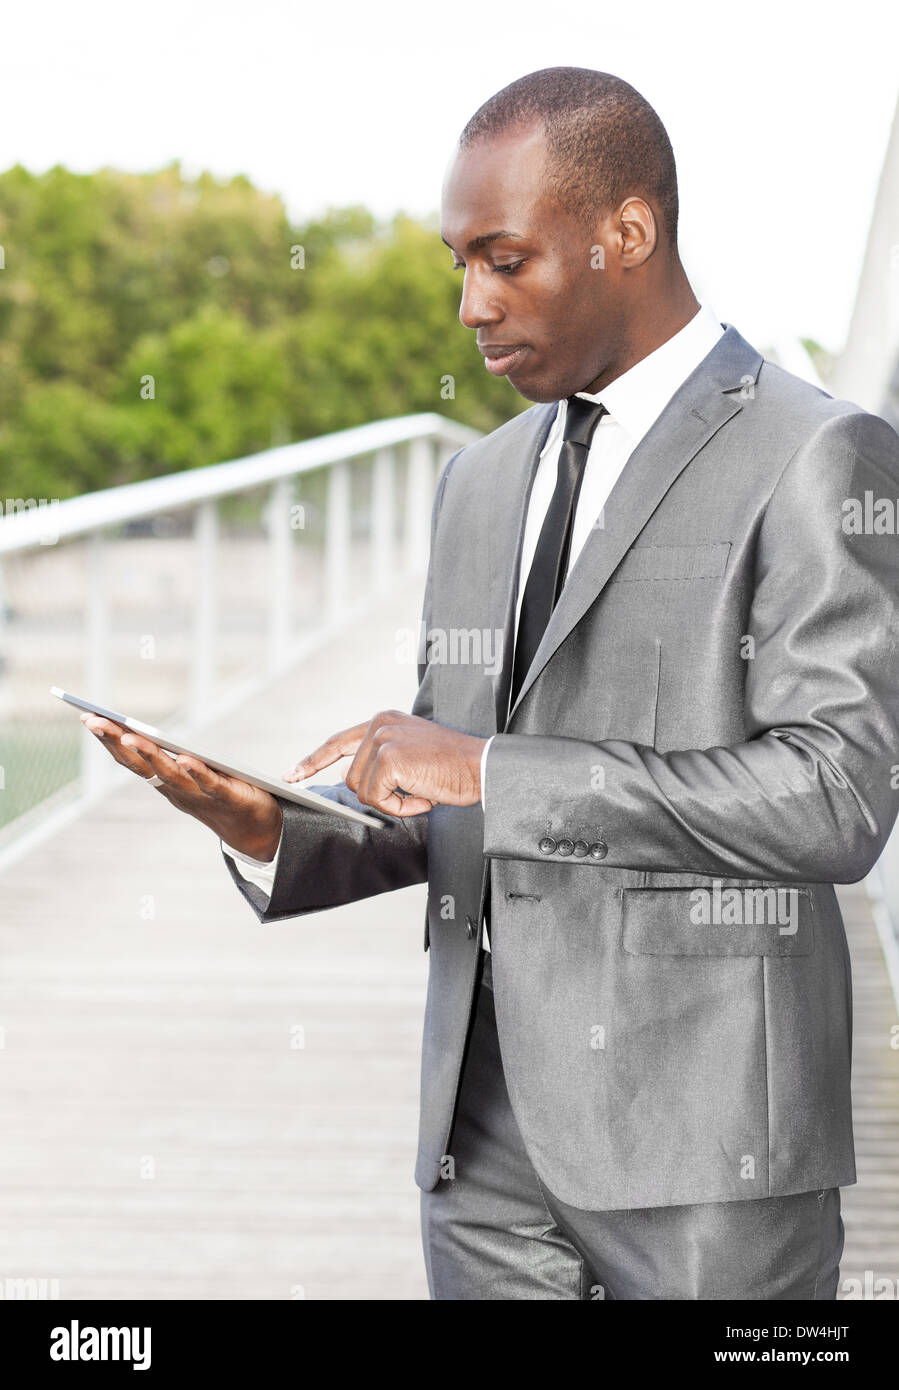 Portrait of a businessman working on electronic tablet Banque D'Images